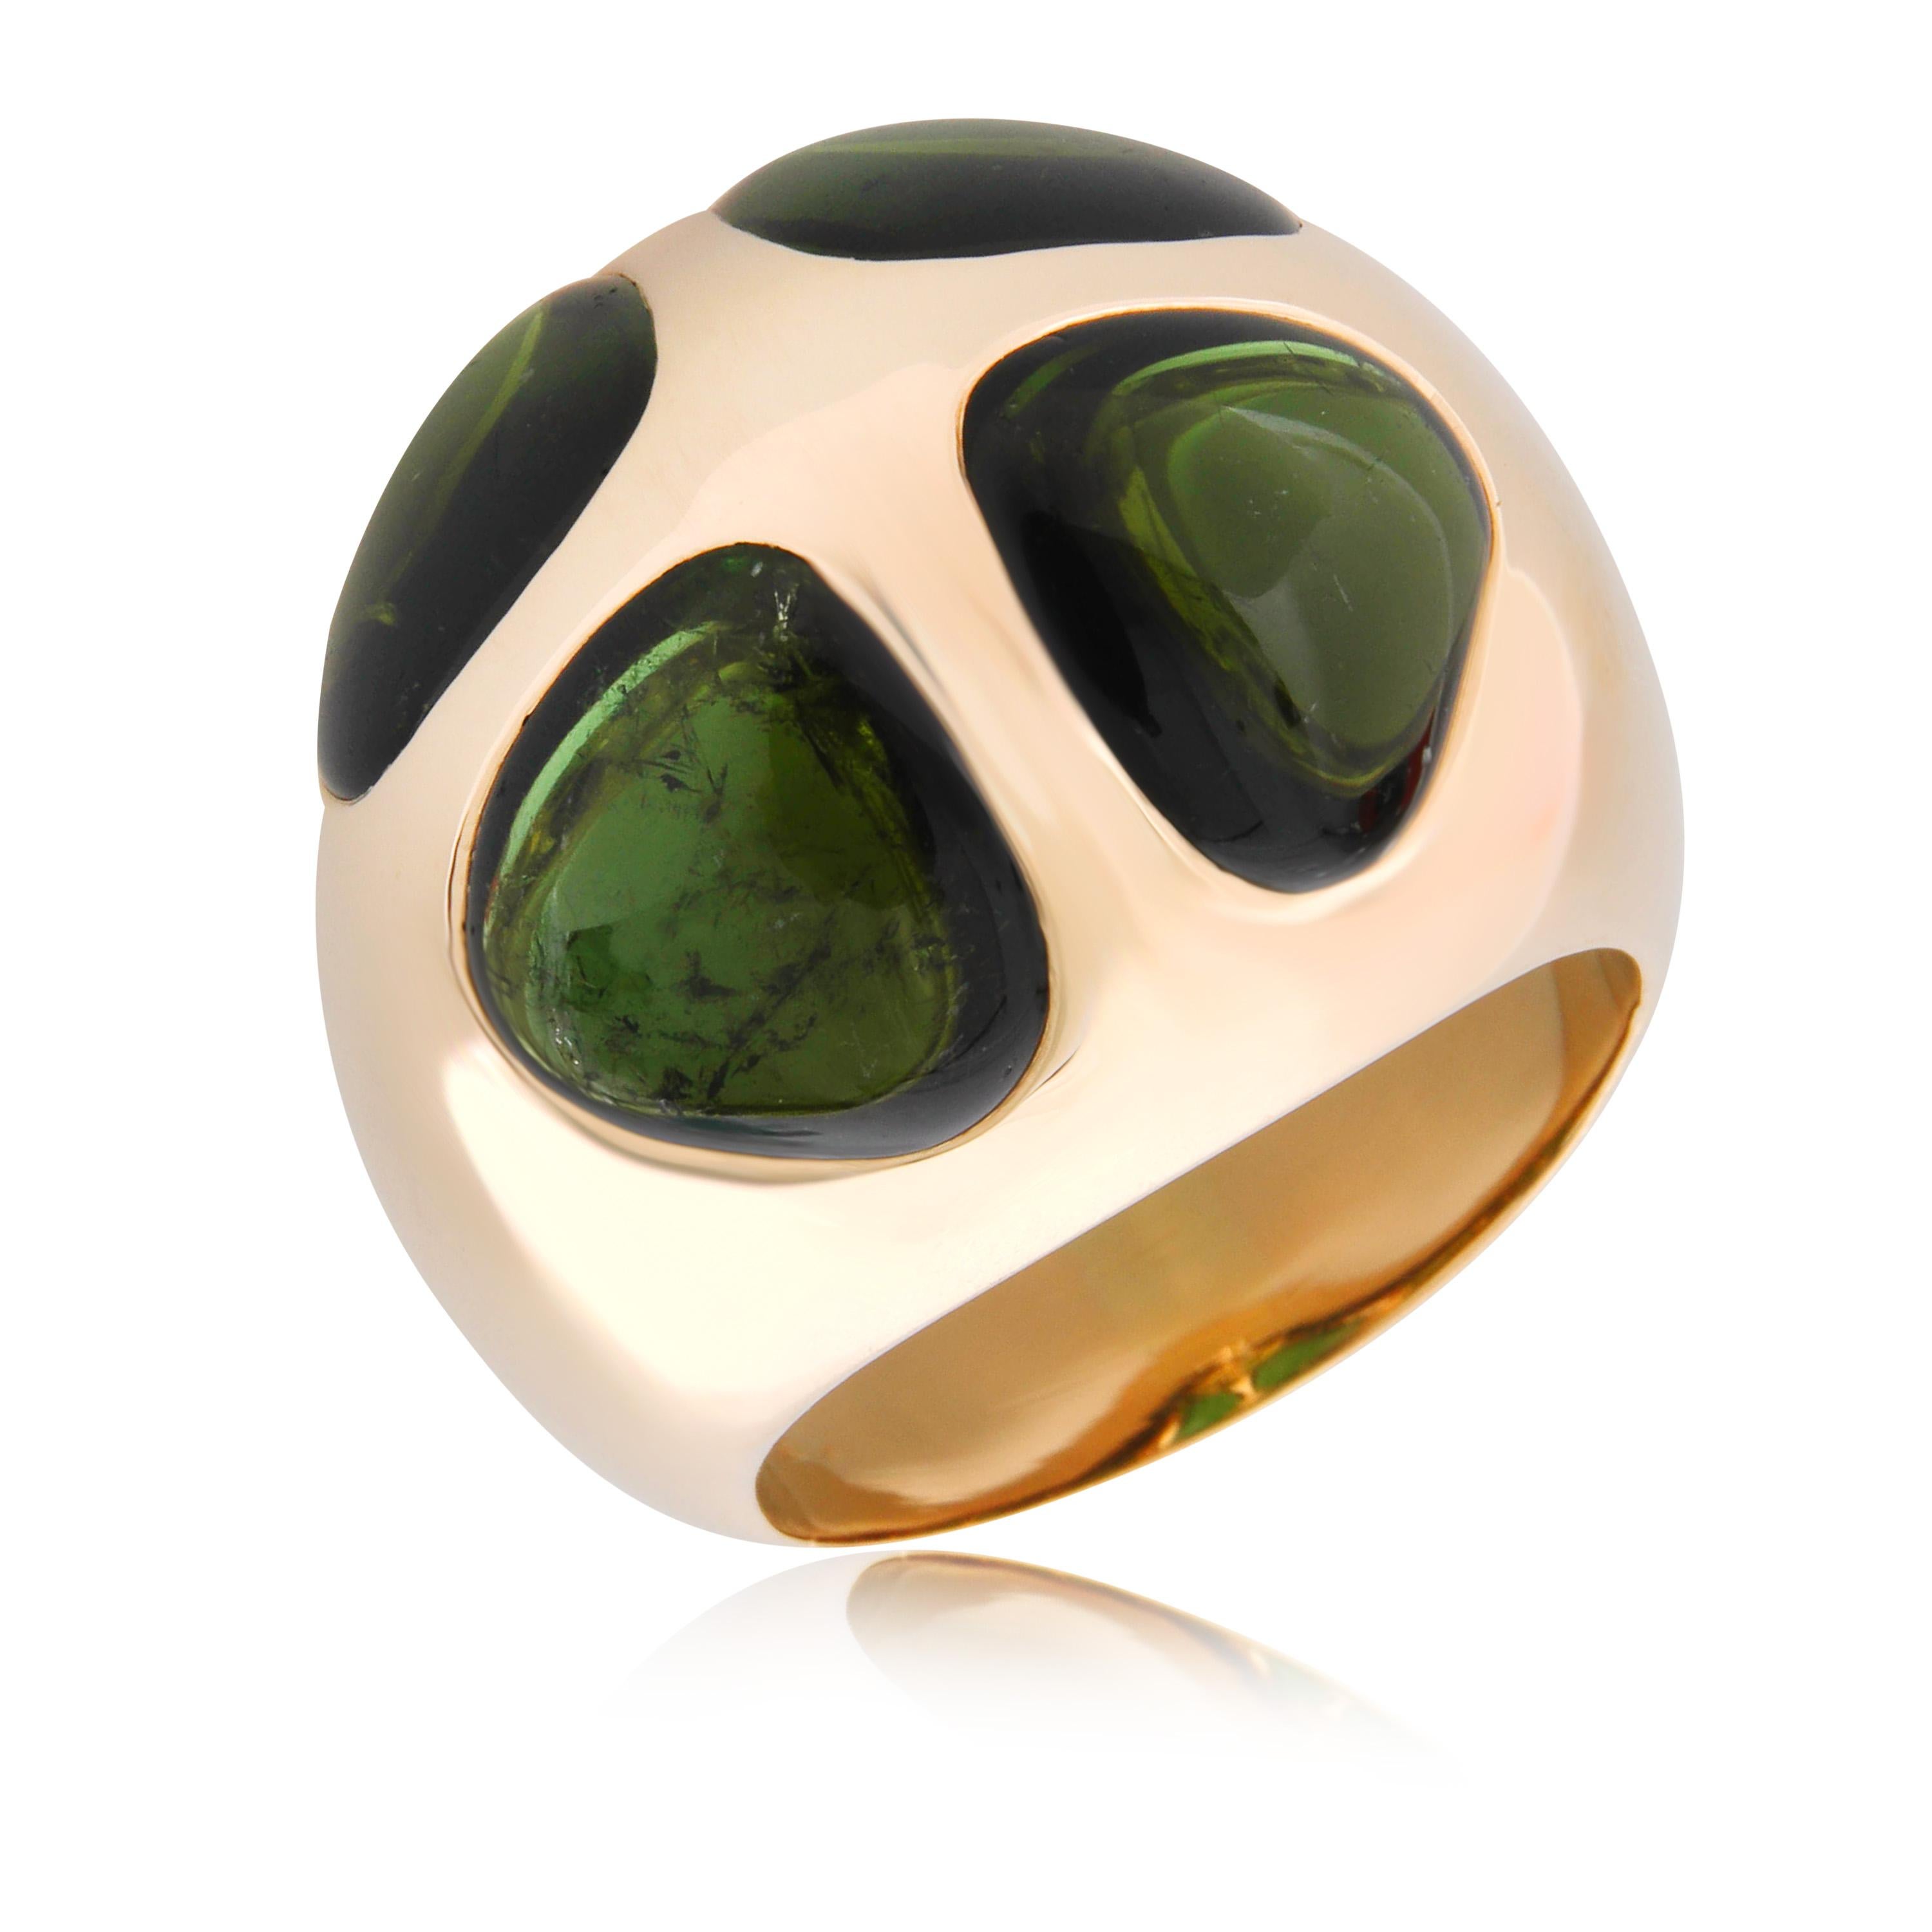 Pomellato Iconica Green Tourmaline Cocktail Ring in 18k Yellow Gold 1